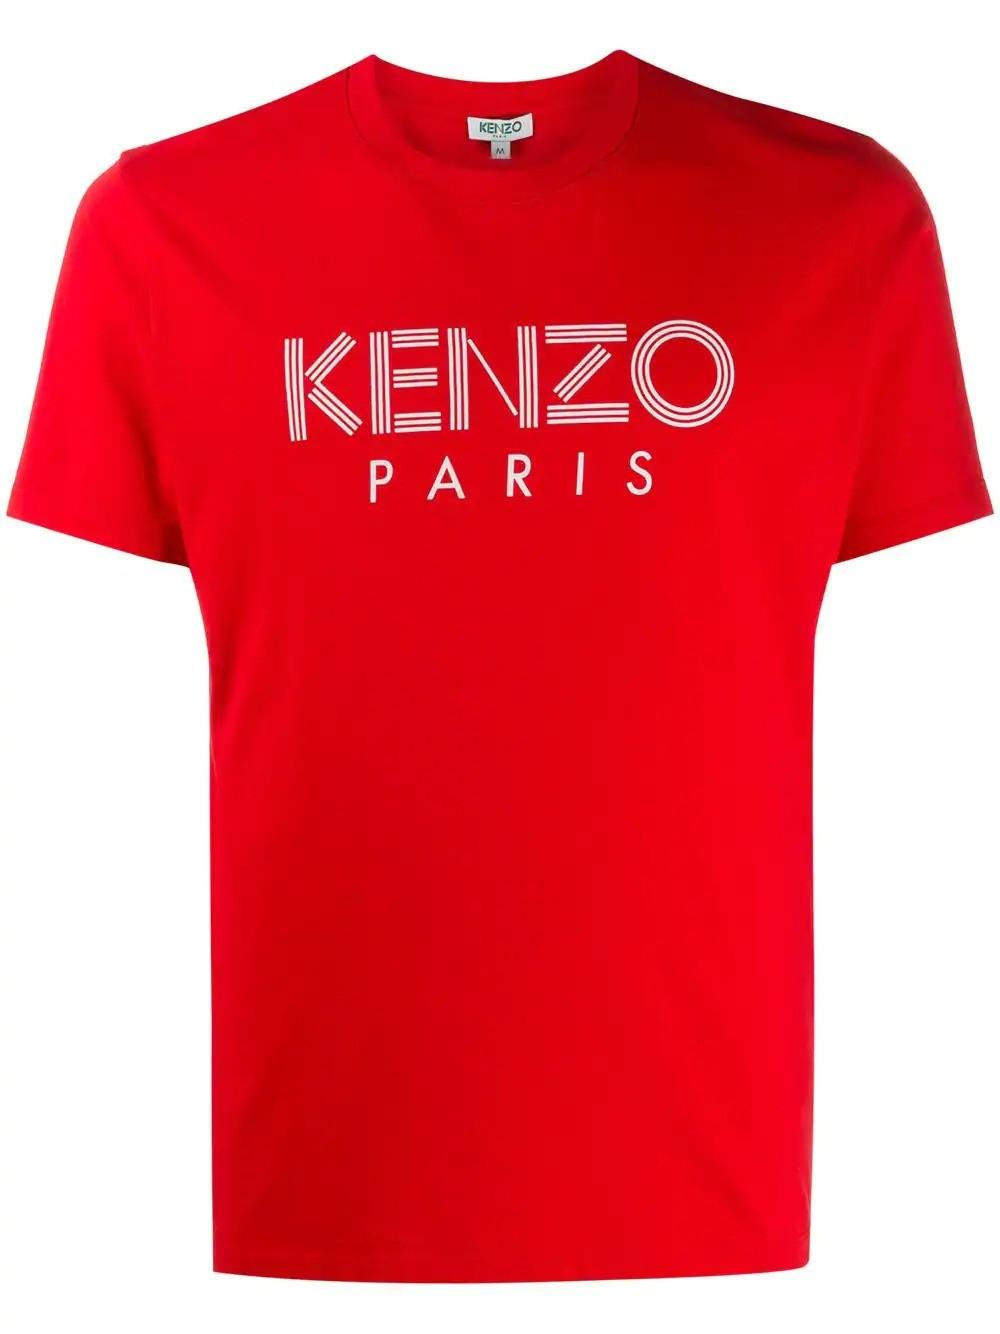 KENZO Cotton Logo Printed T-shirt in Red for Men - Lyst